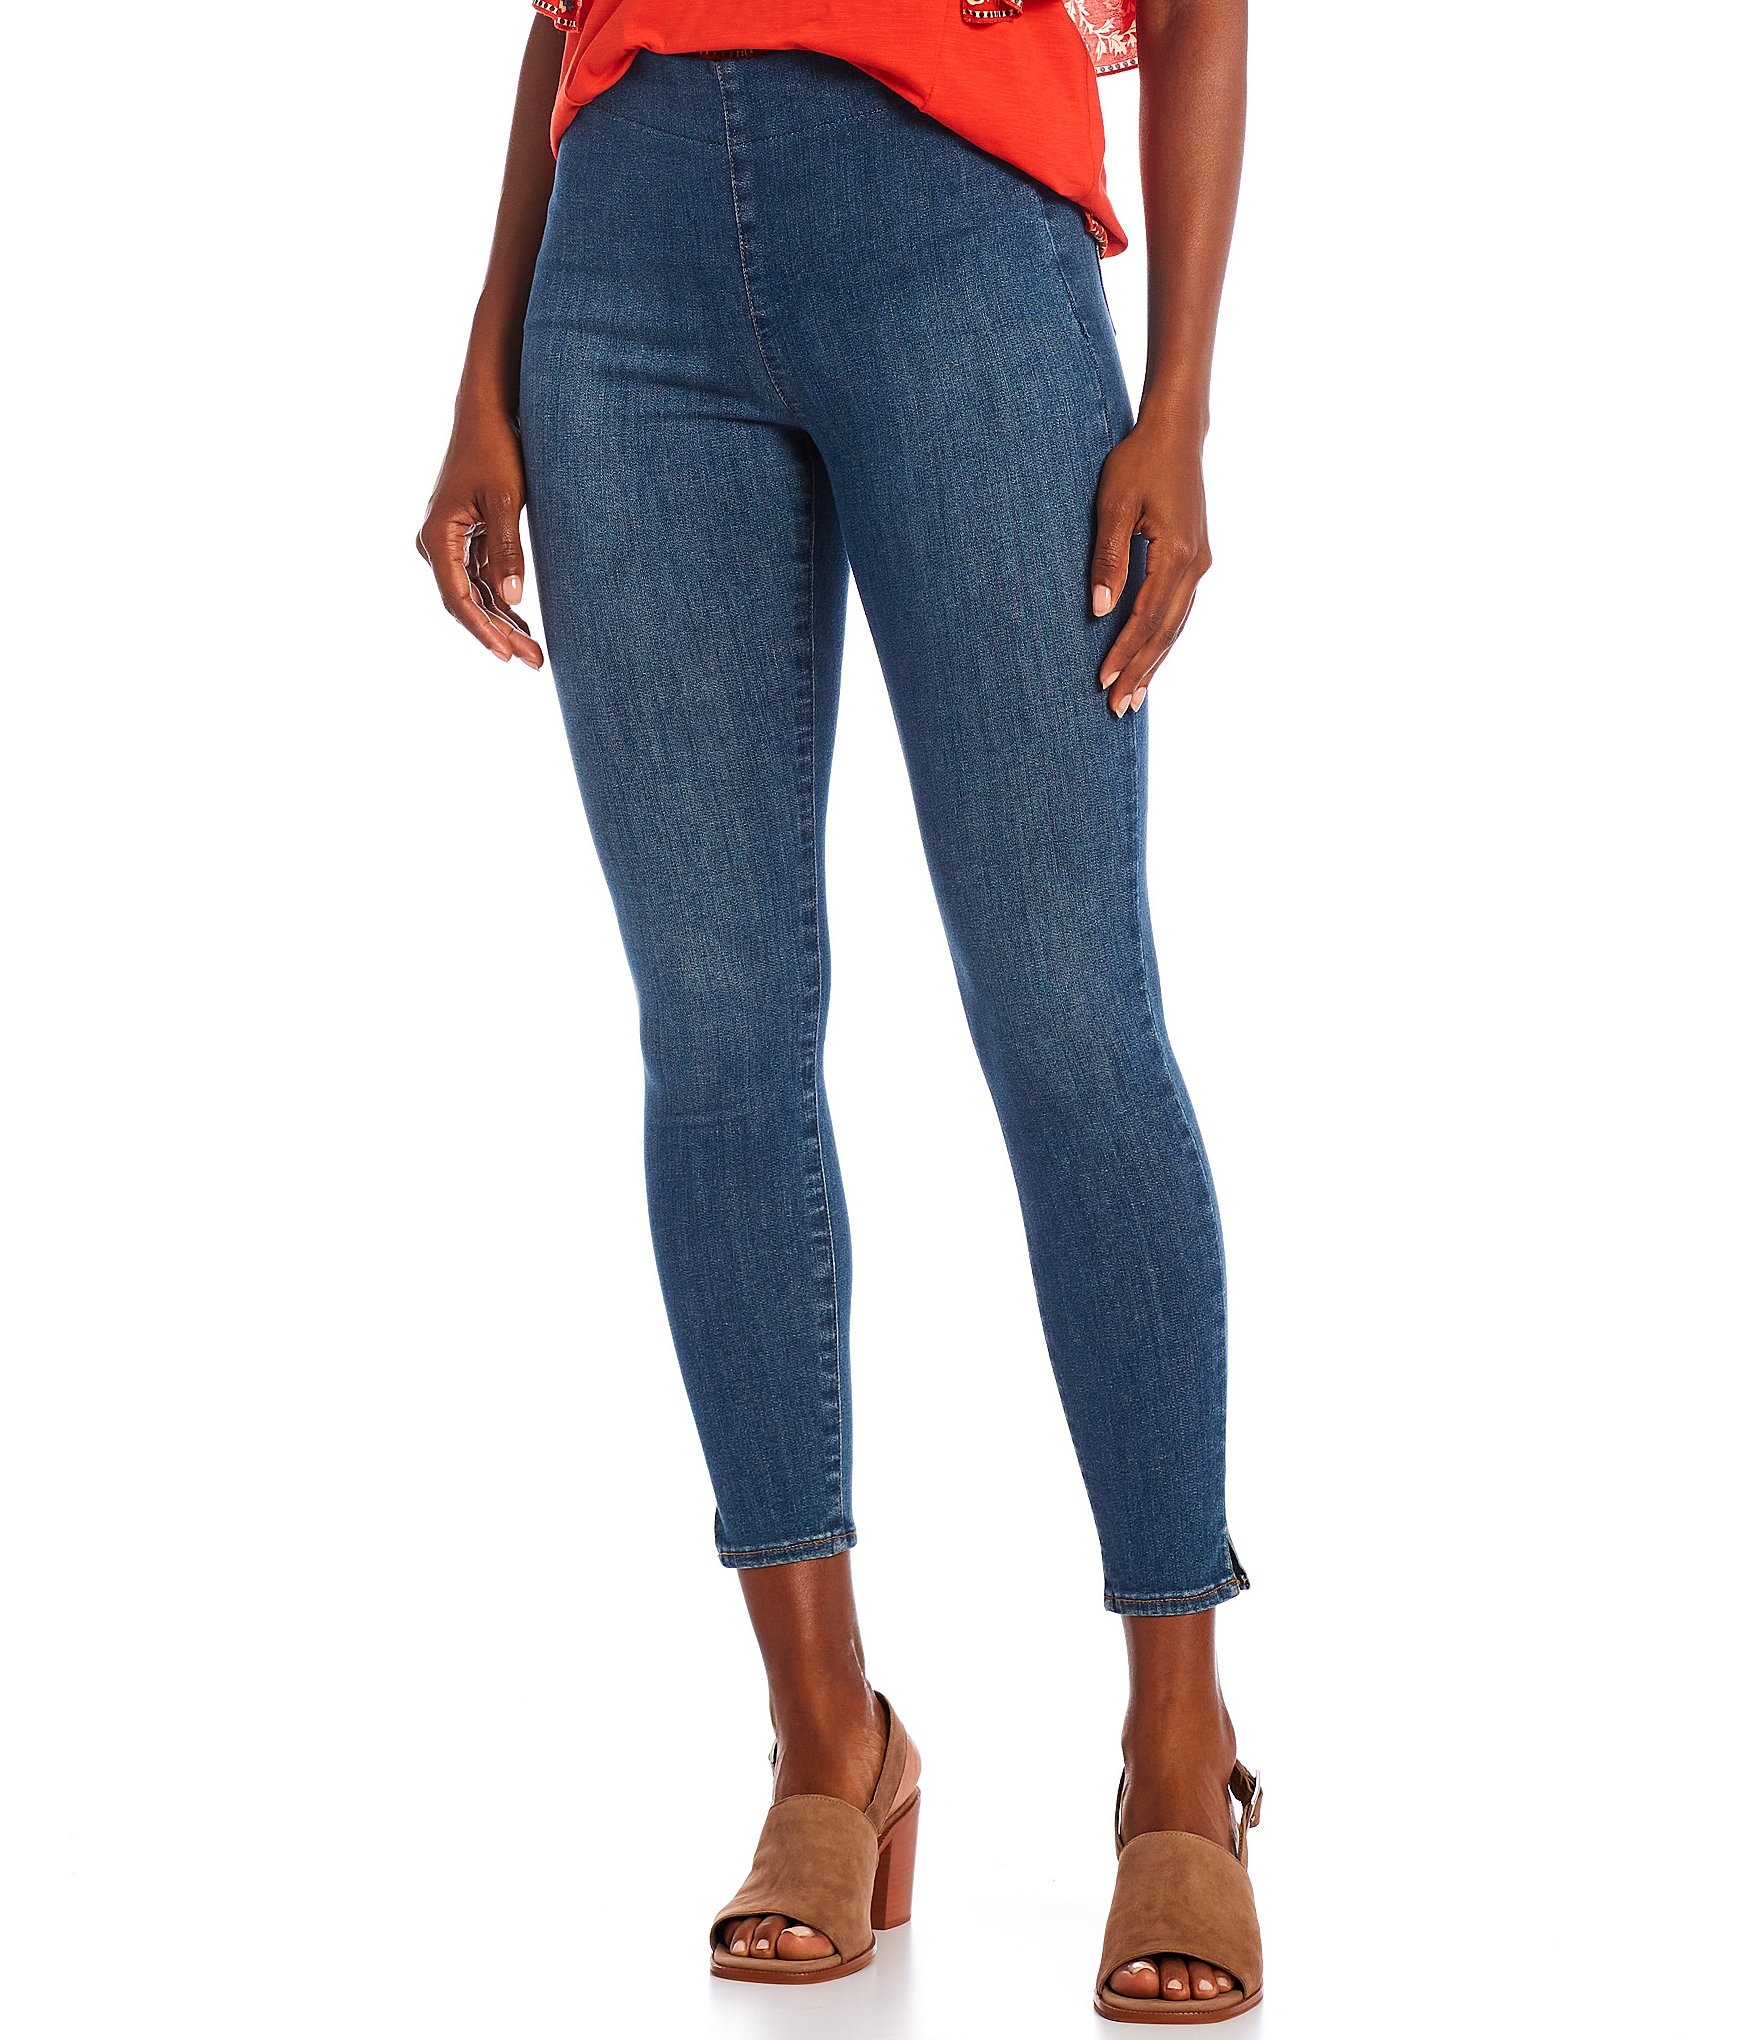 Wholesale ankle zipper jeans For A Pull-On Classic Look 